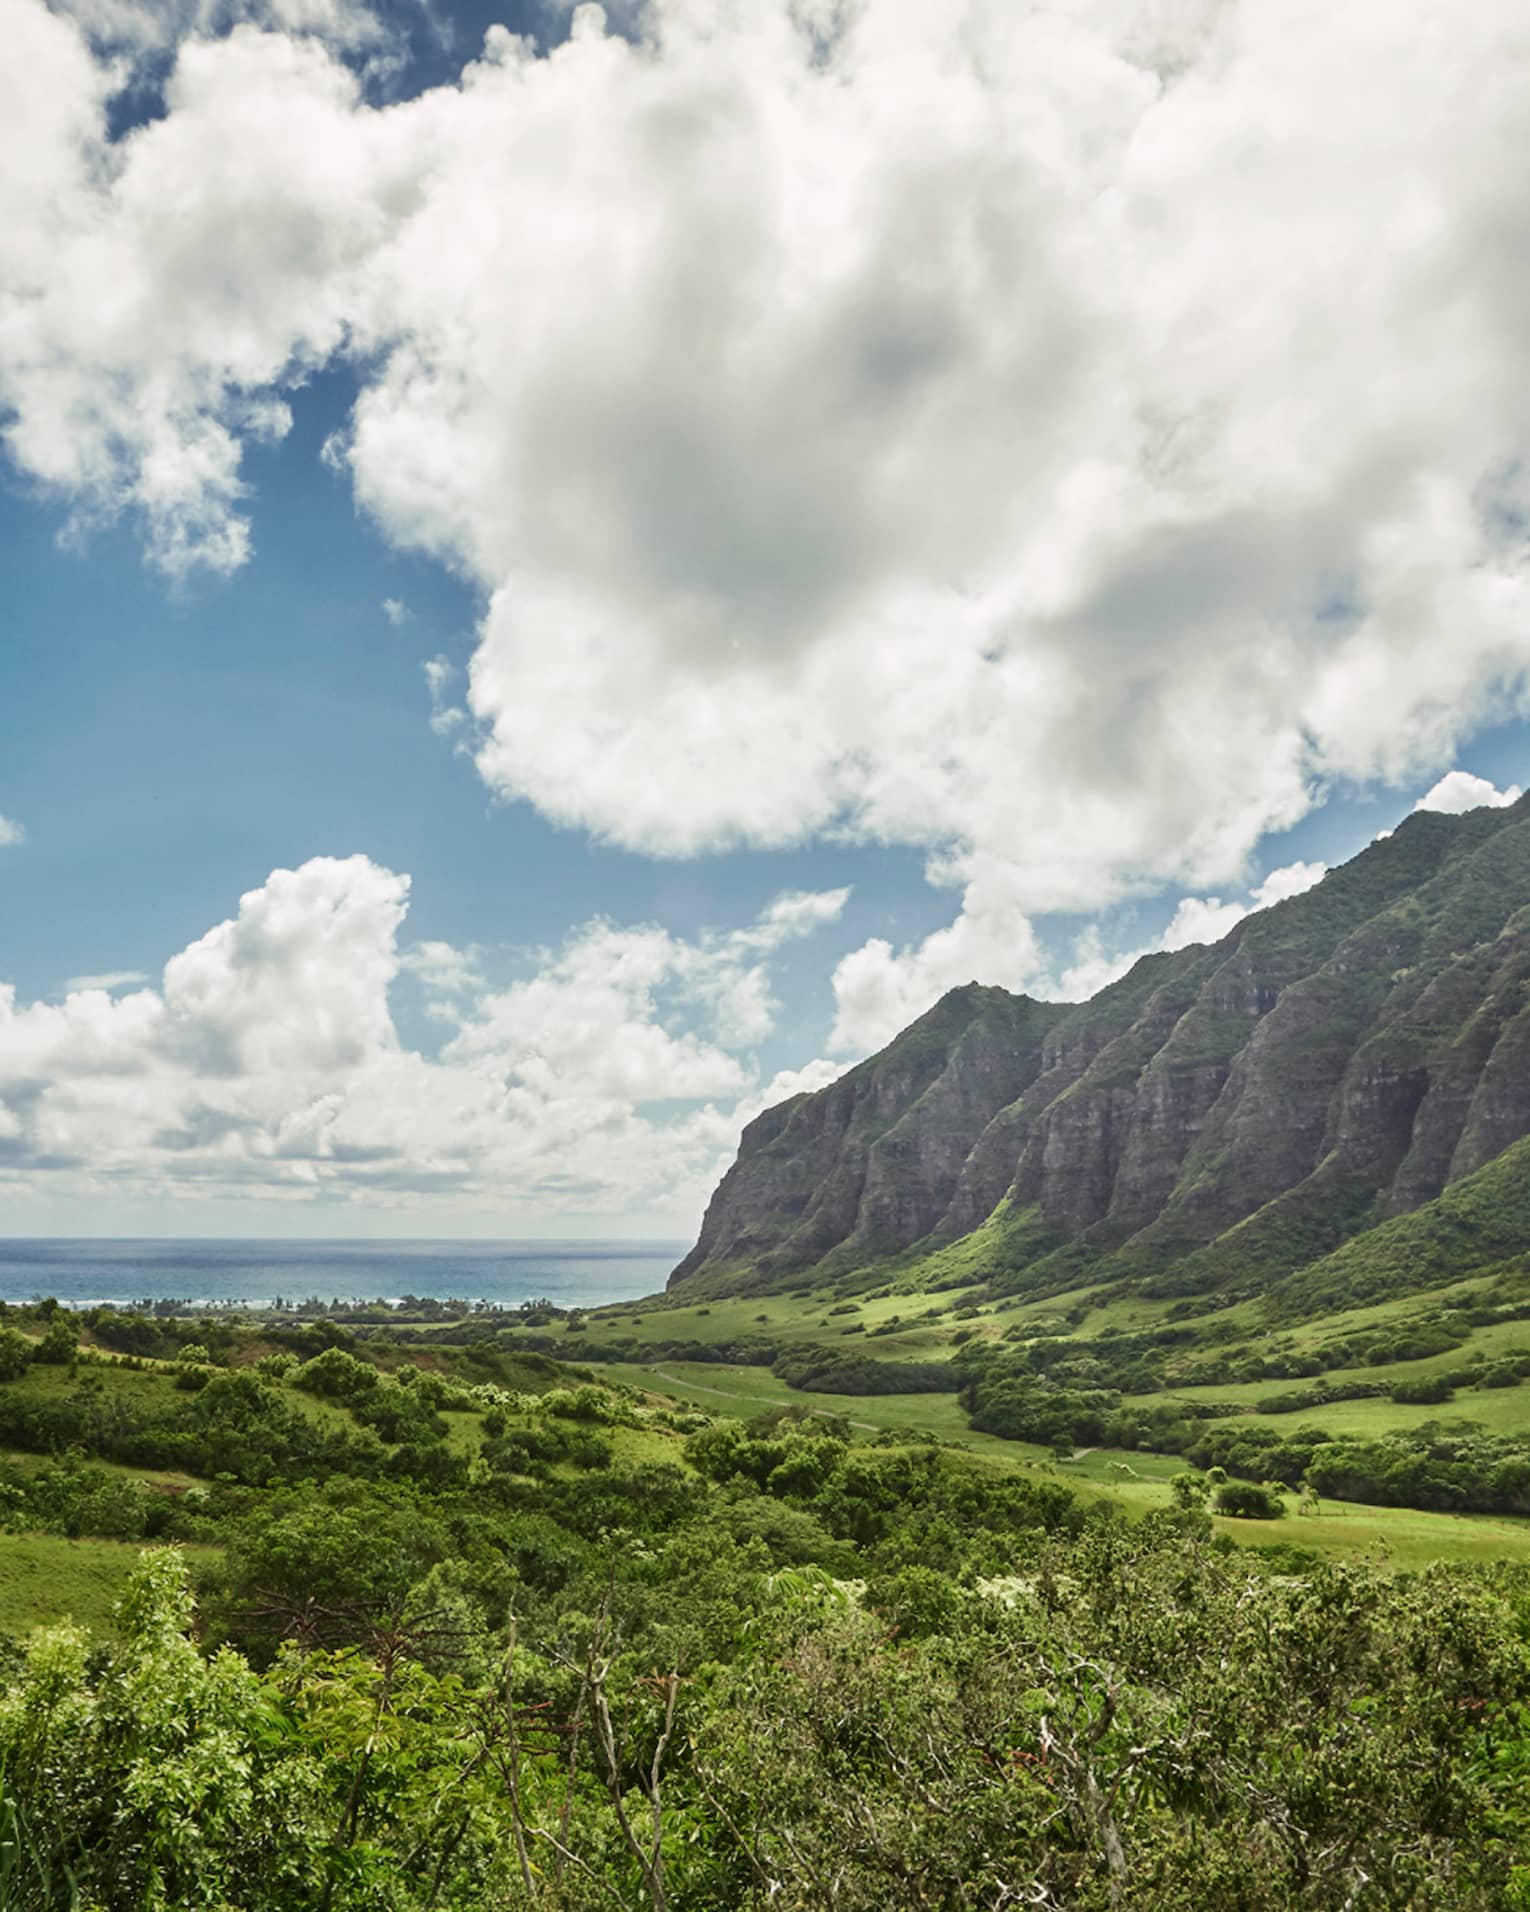 Oahu sweeping green cliffs, mountains, under blue skies